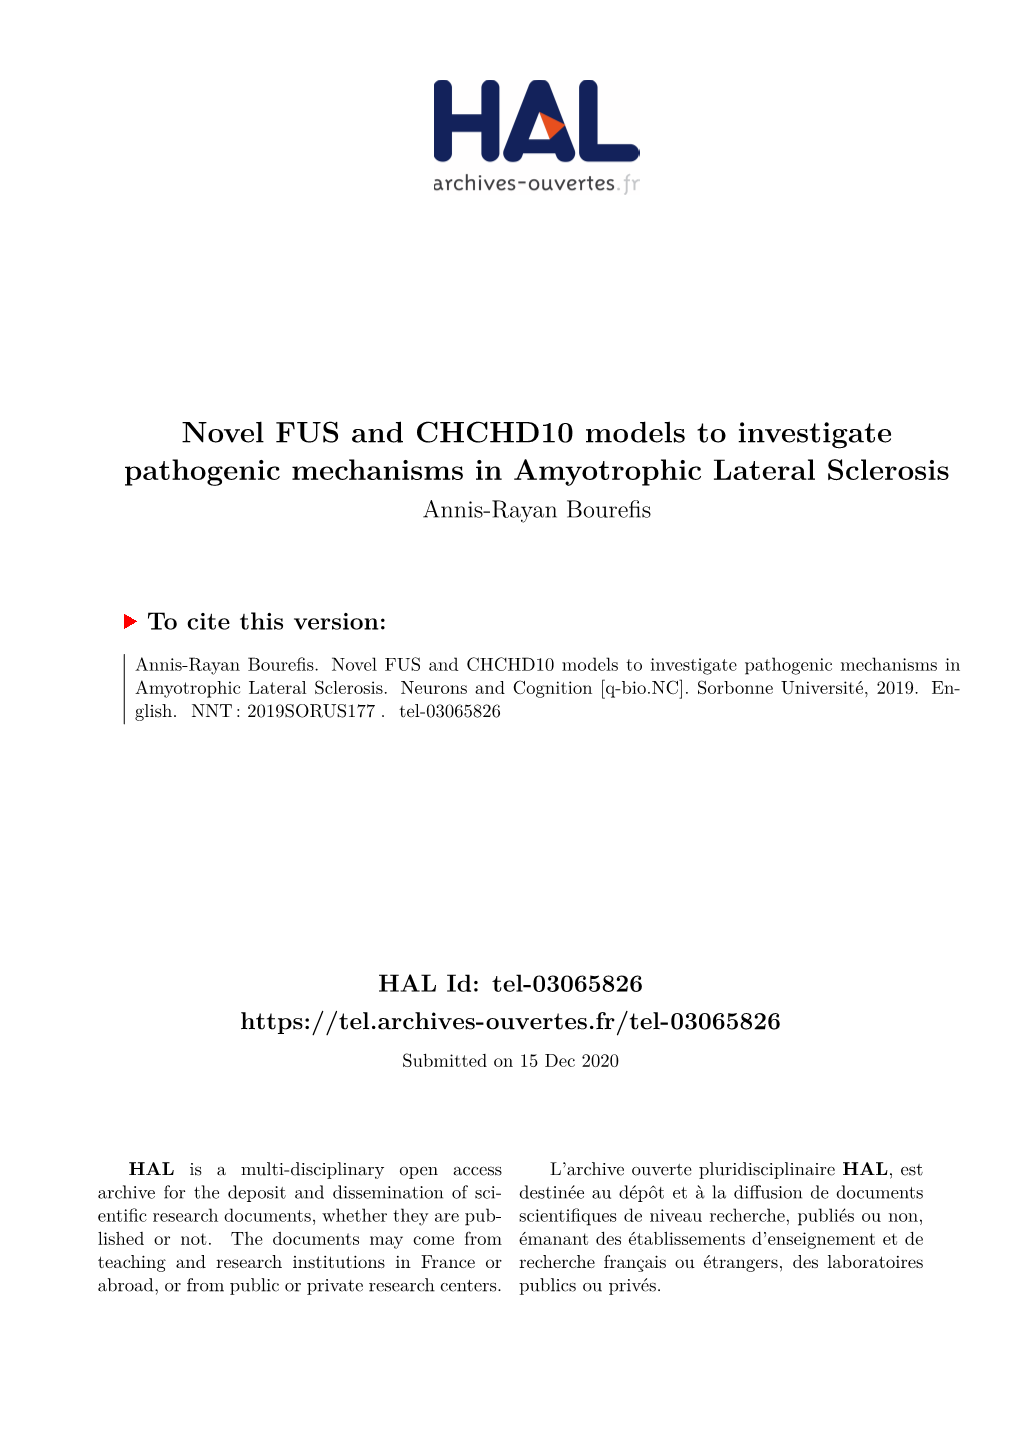 Novel FUS and CHCHD10 Models to Investigate Pathogenic Mechanisms in Amyotrophic Lateral Sclerosis Annis-Rayan Bourefis